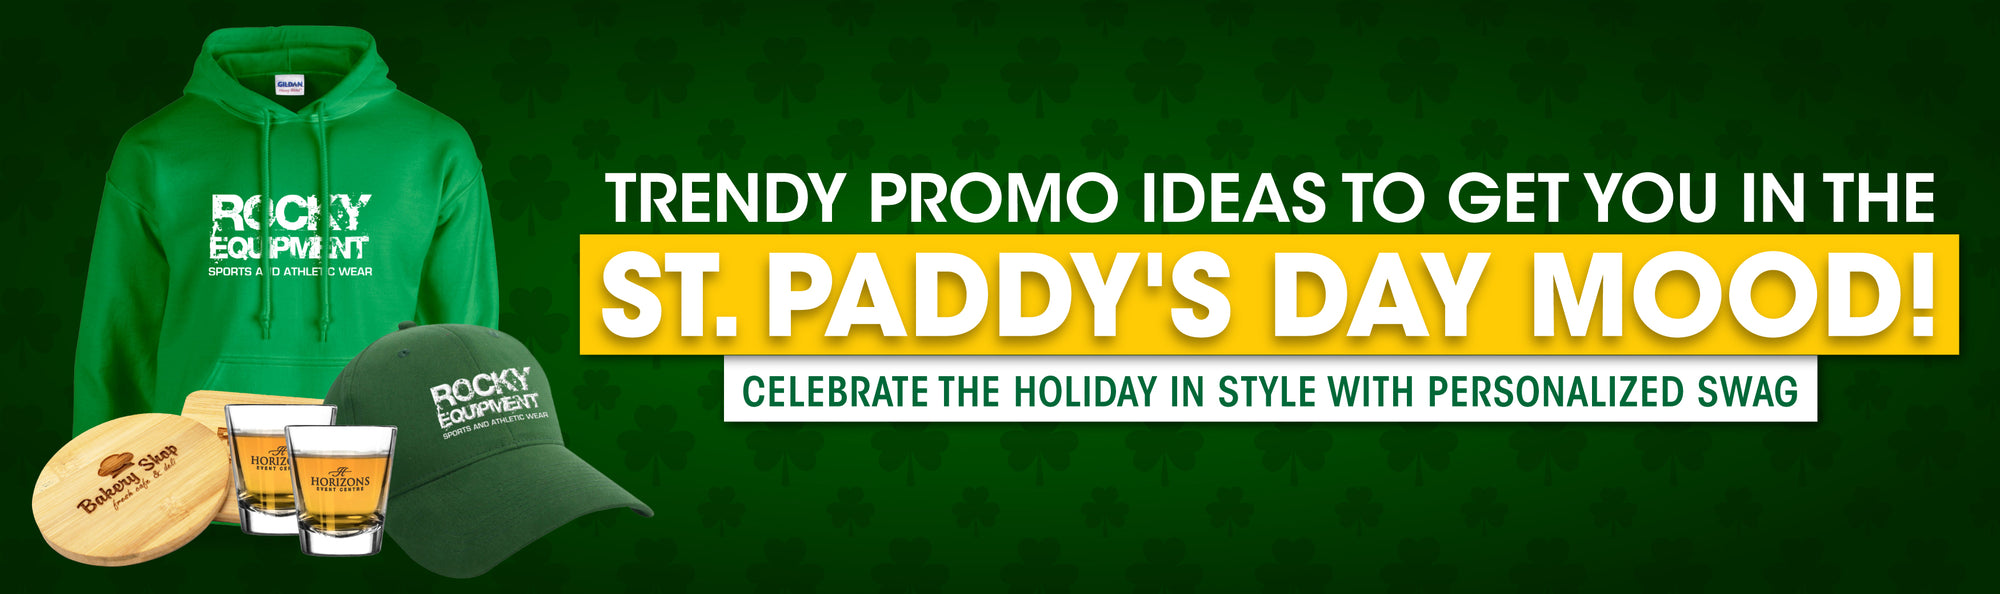 Trendy Promo Ideas to Get You in the St. Paddy's Day Mood!